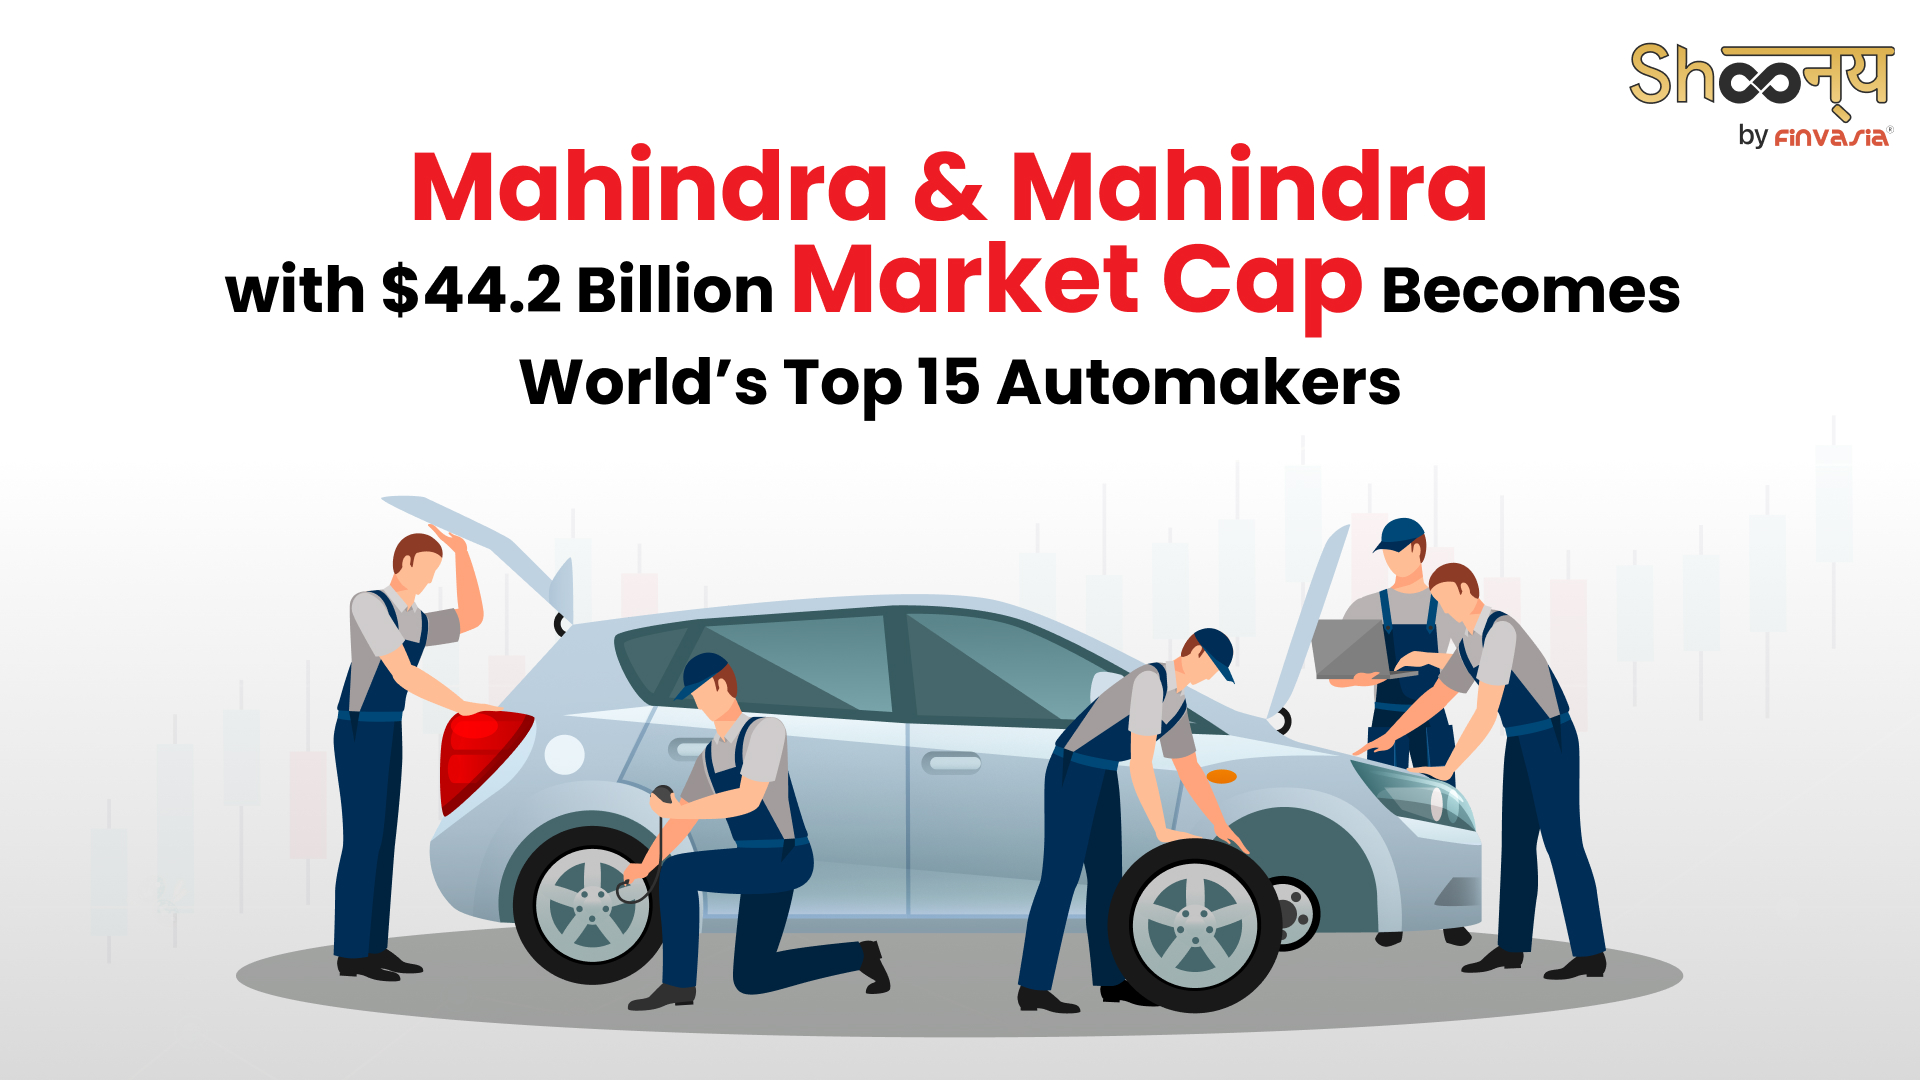 M&M amongst the World’s 15 Largest Automobile Manufacturers